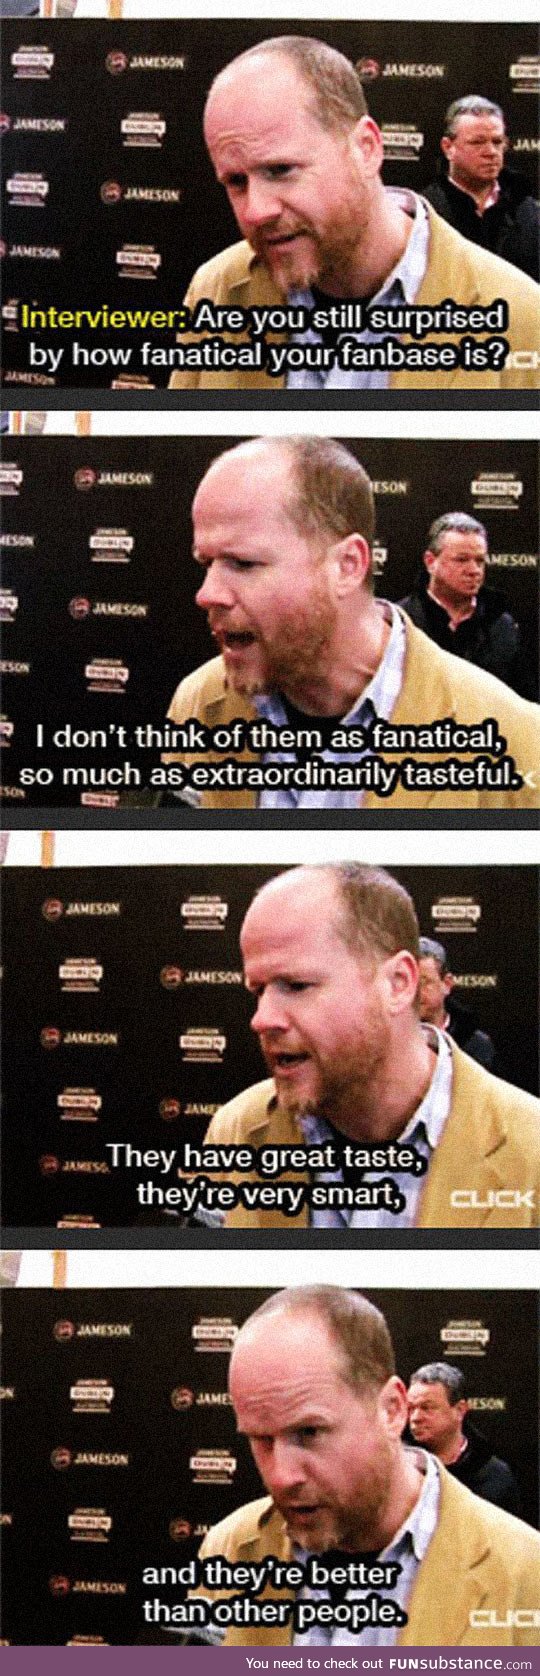 Joss Whedon's Thoughts About His Fans